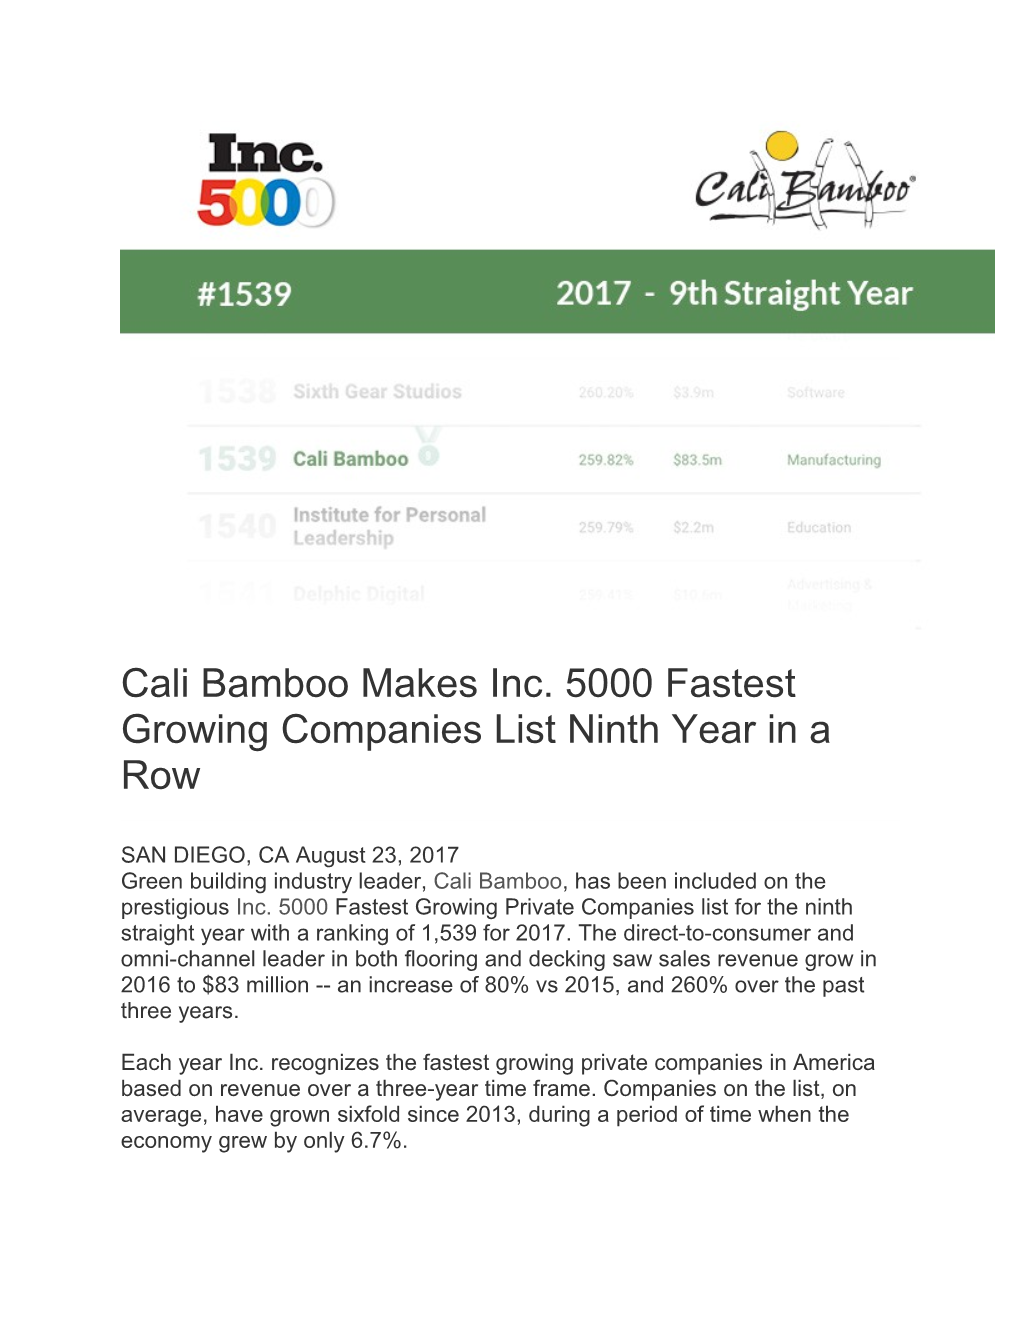 Cali Bamboo Makes Inc. 5000 Fastest Growing Companies List Ninth Year in a Row